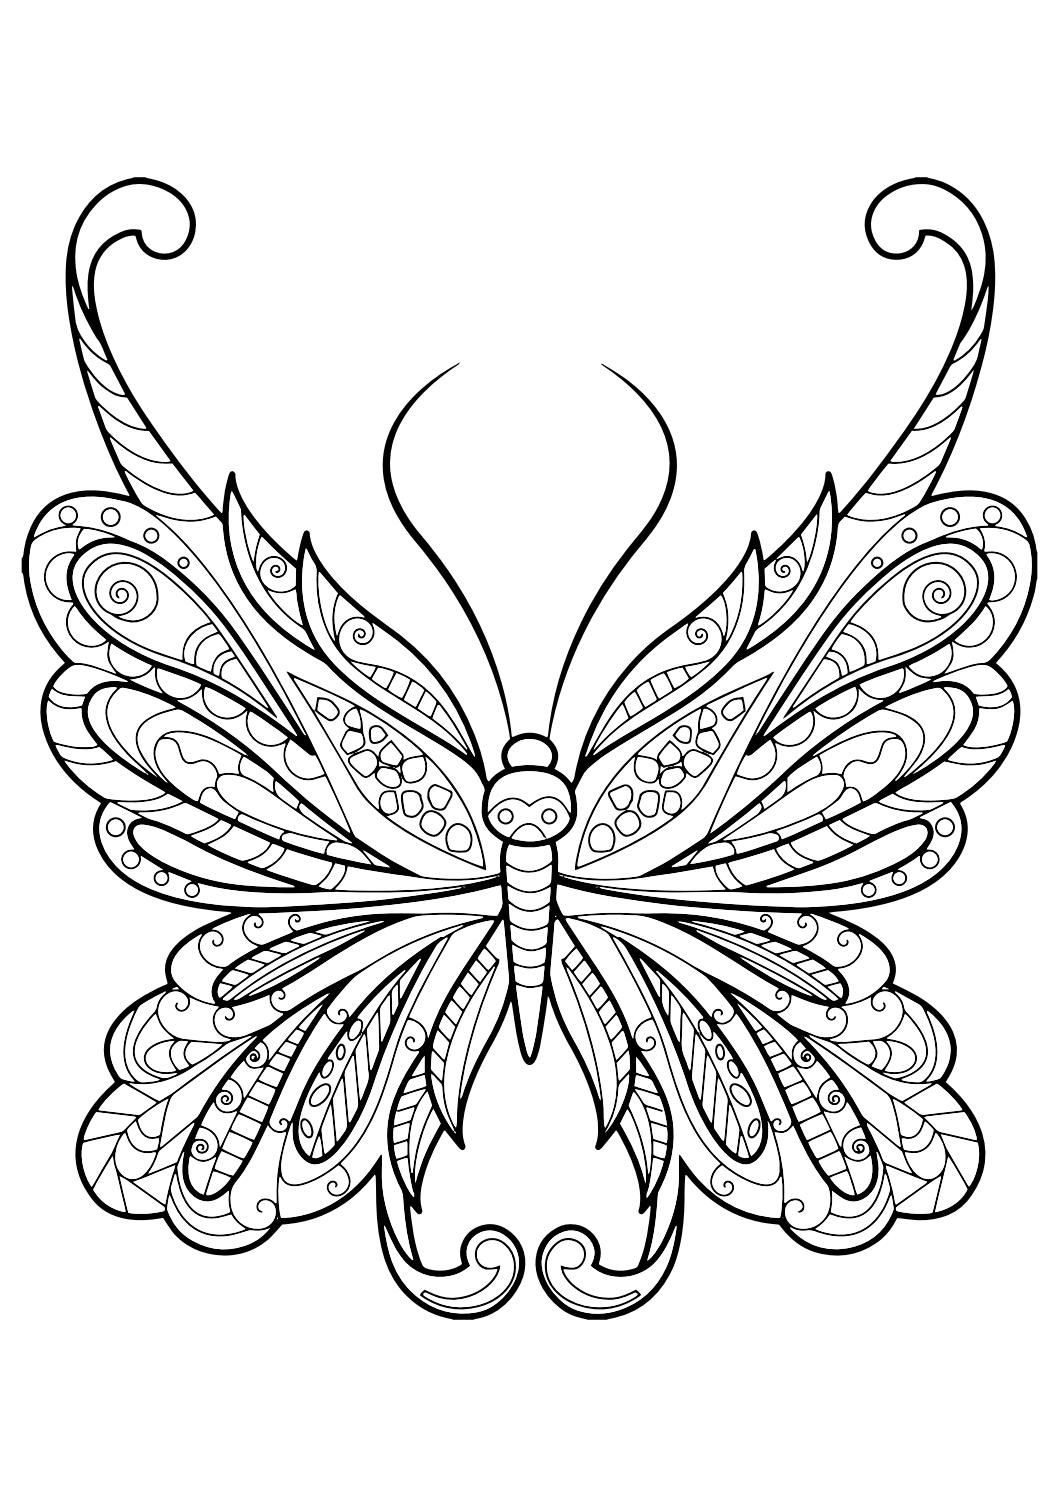 Adult Butterfly Coloring Pages
 Adult Butterfly Coloring Book